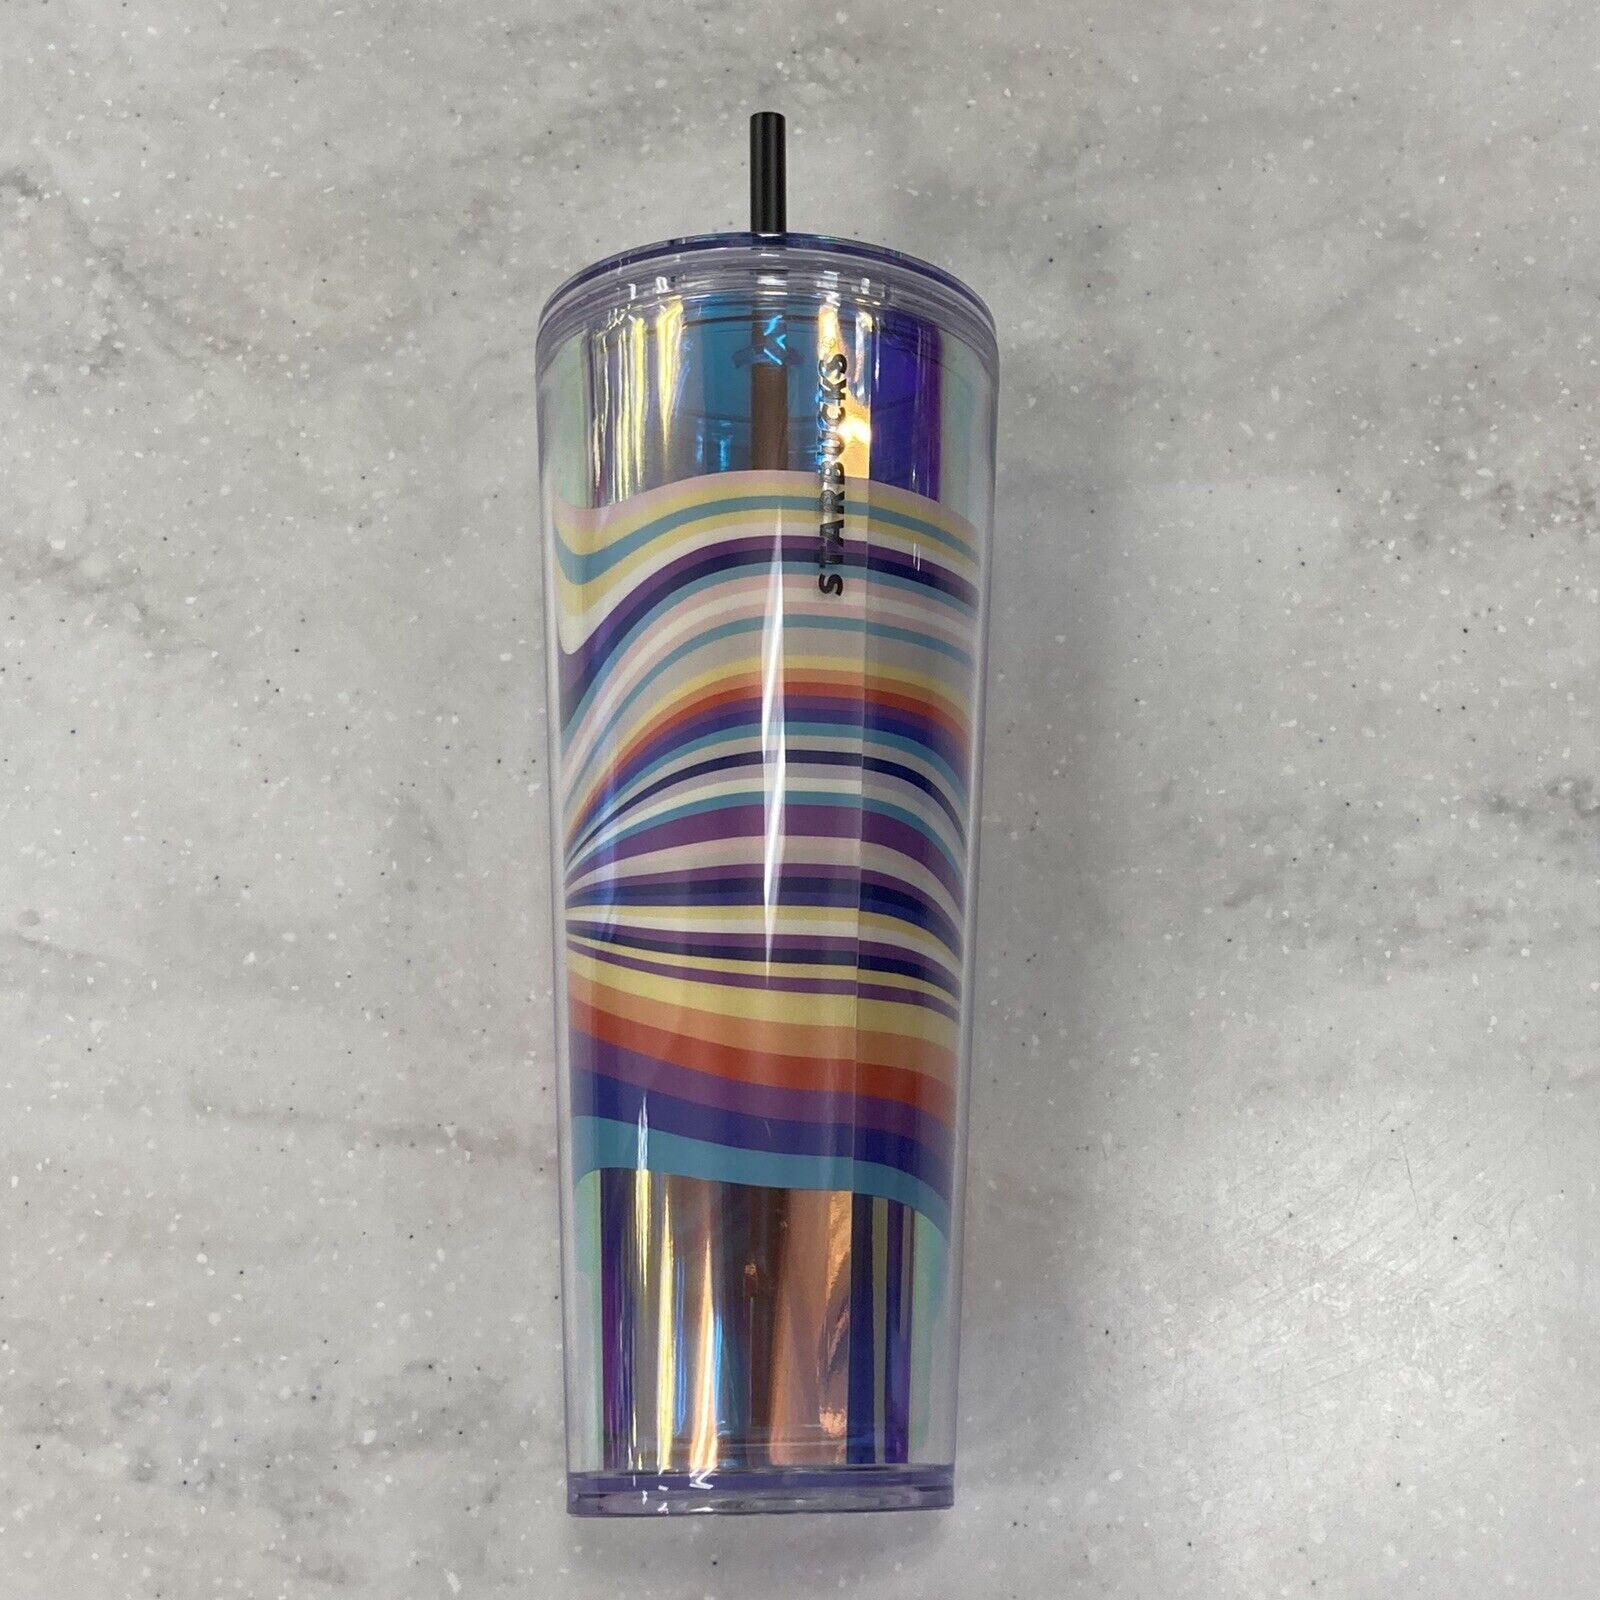 New 2021 Starbucks Target Exclusive Tumbler Rainbow Swirl Marble Cold Cup Venti